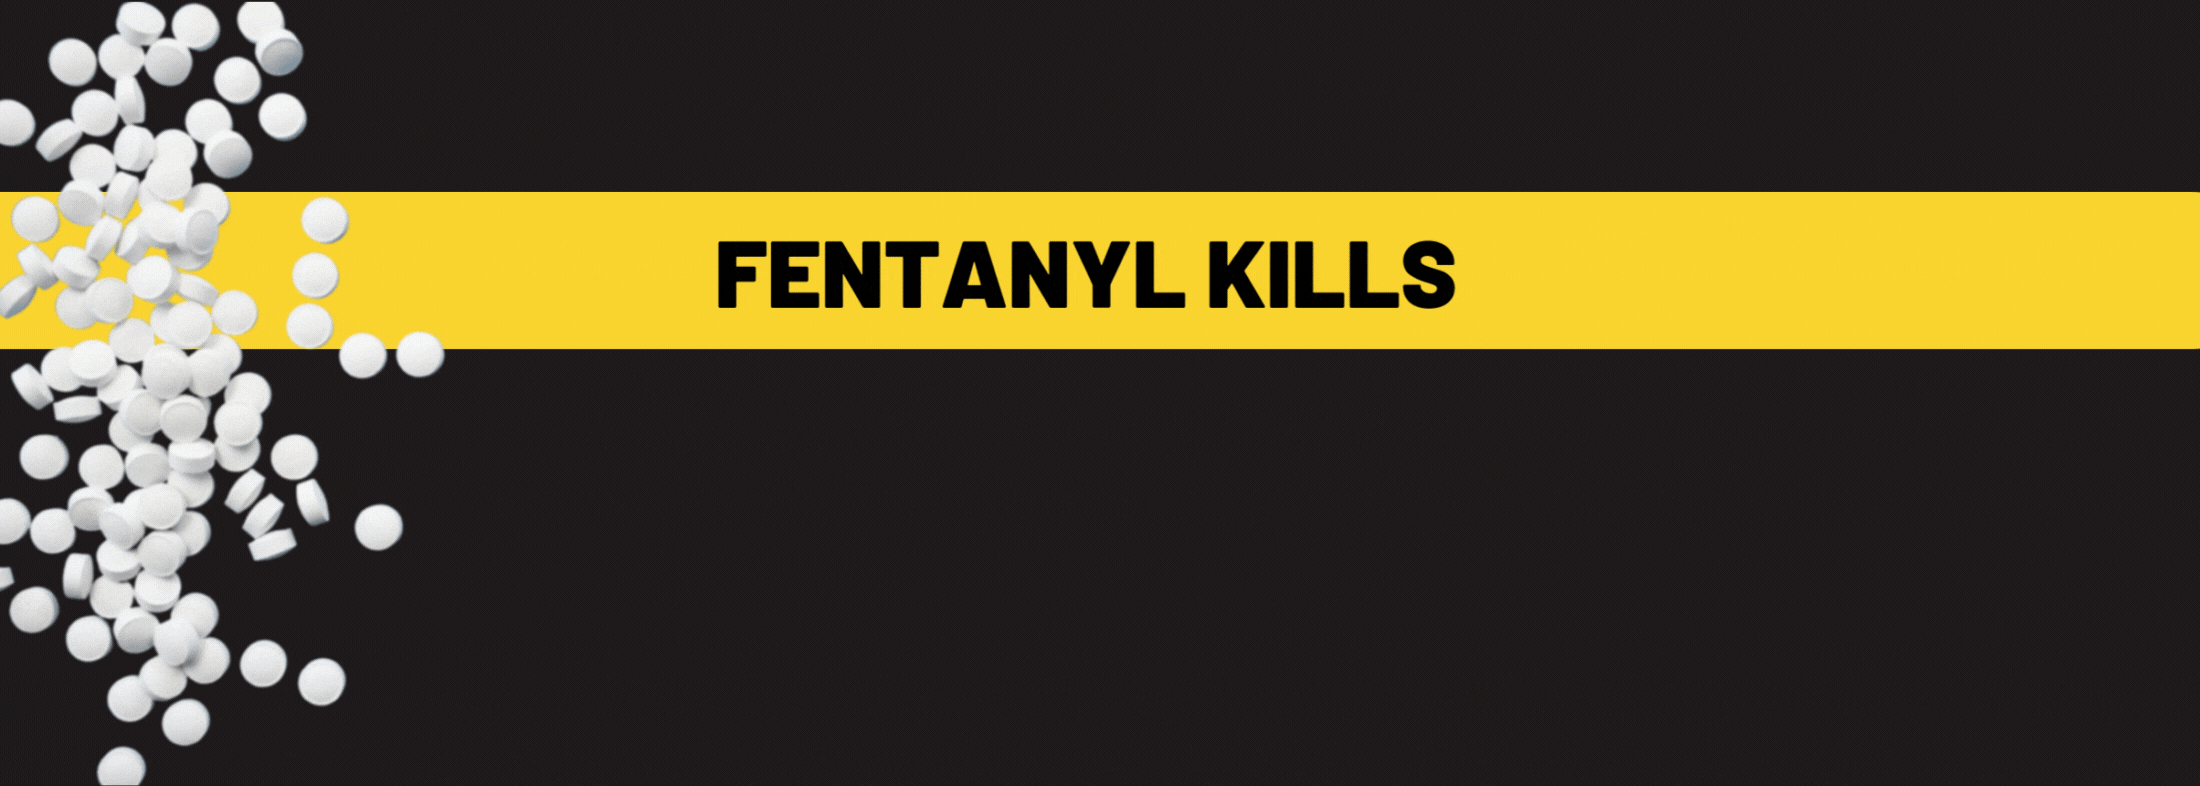 This header is black with a yellow stripe. There is black text on the yellow stripe that reads "Fentanyl Kills." White pills are scattered on the left side of the header.